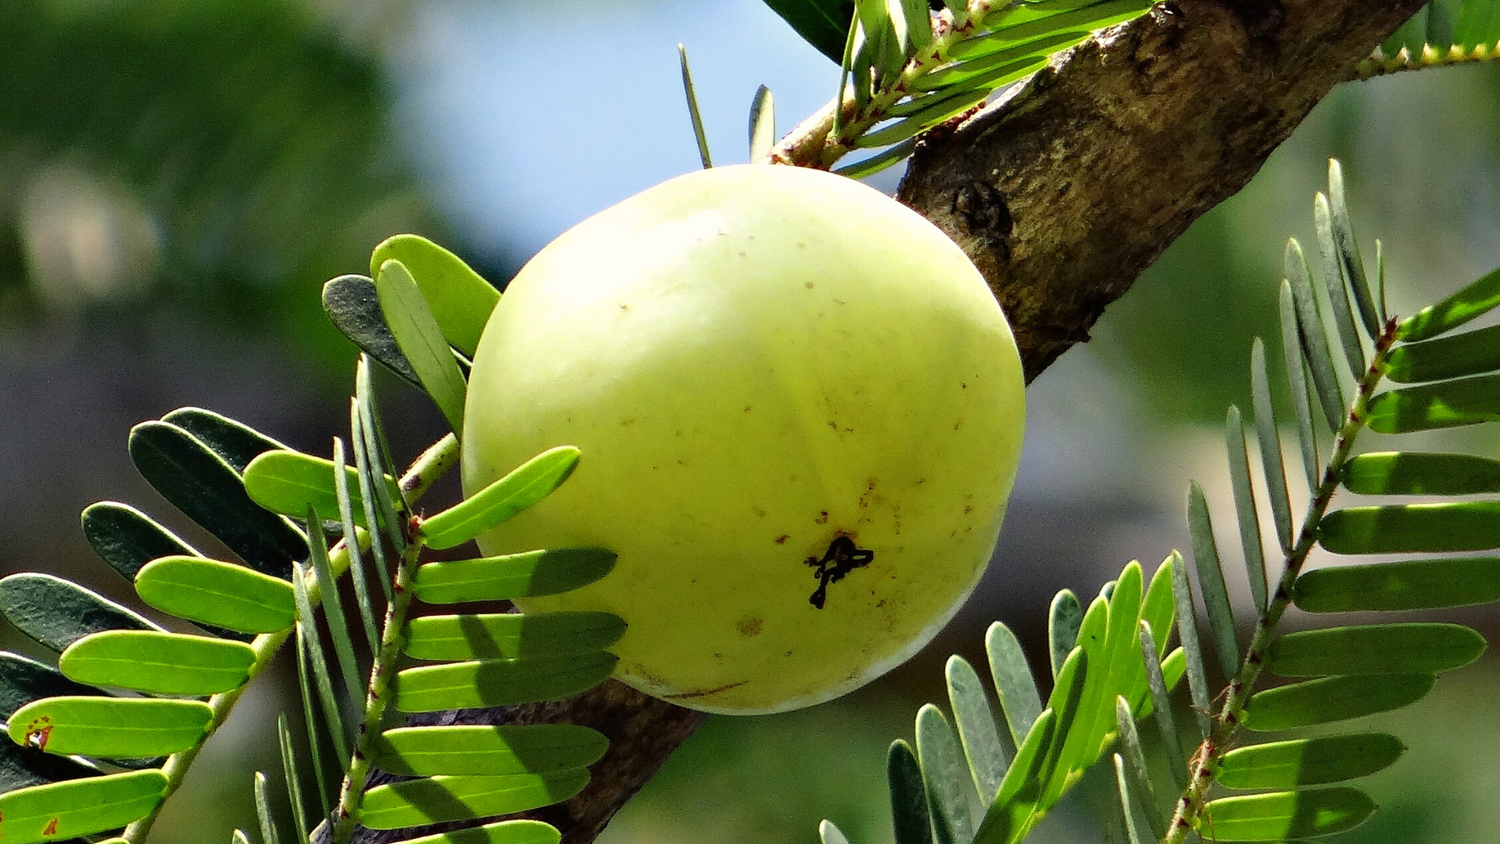 AMLA - Nature provided Free Immunity Booster For All!